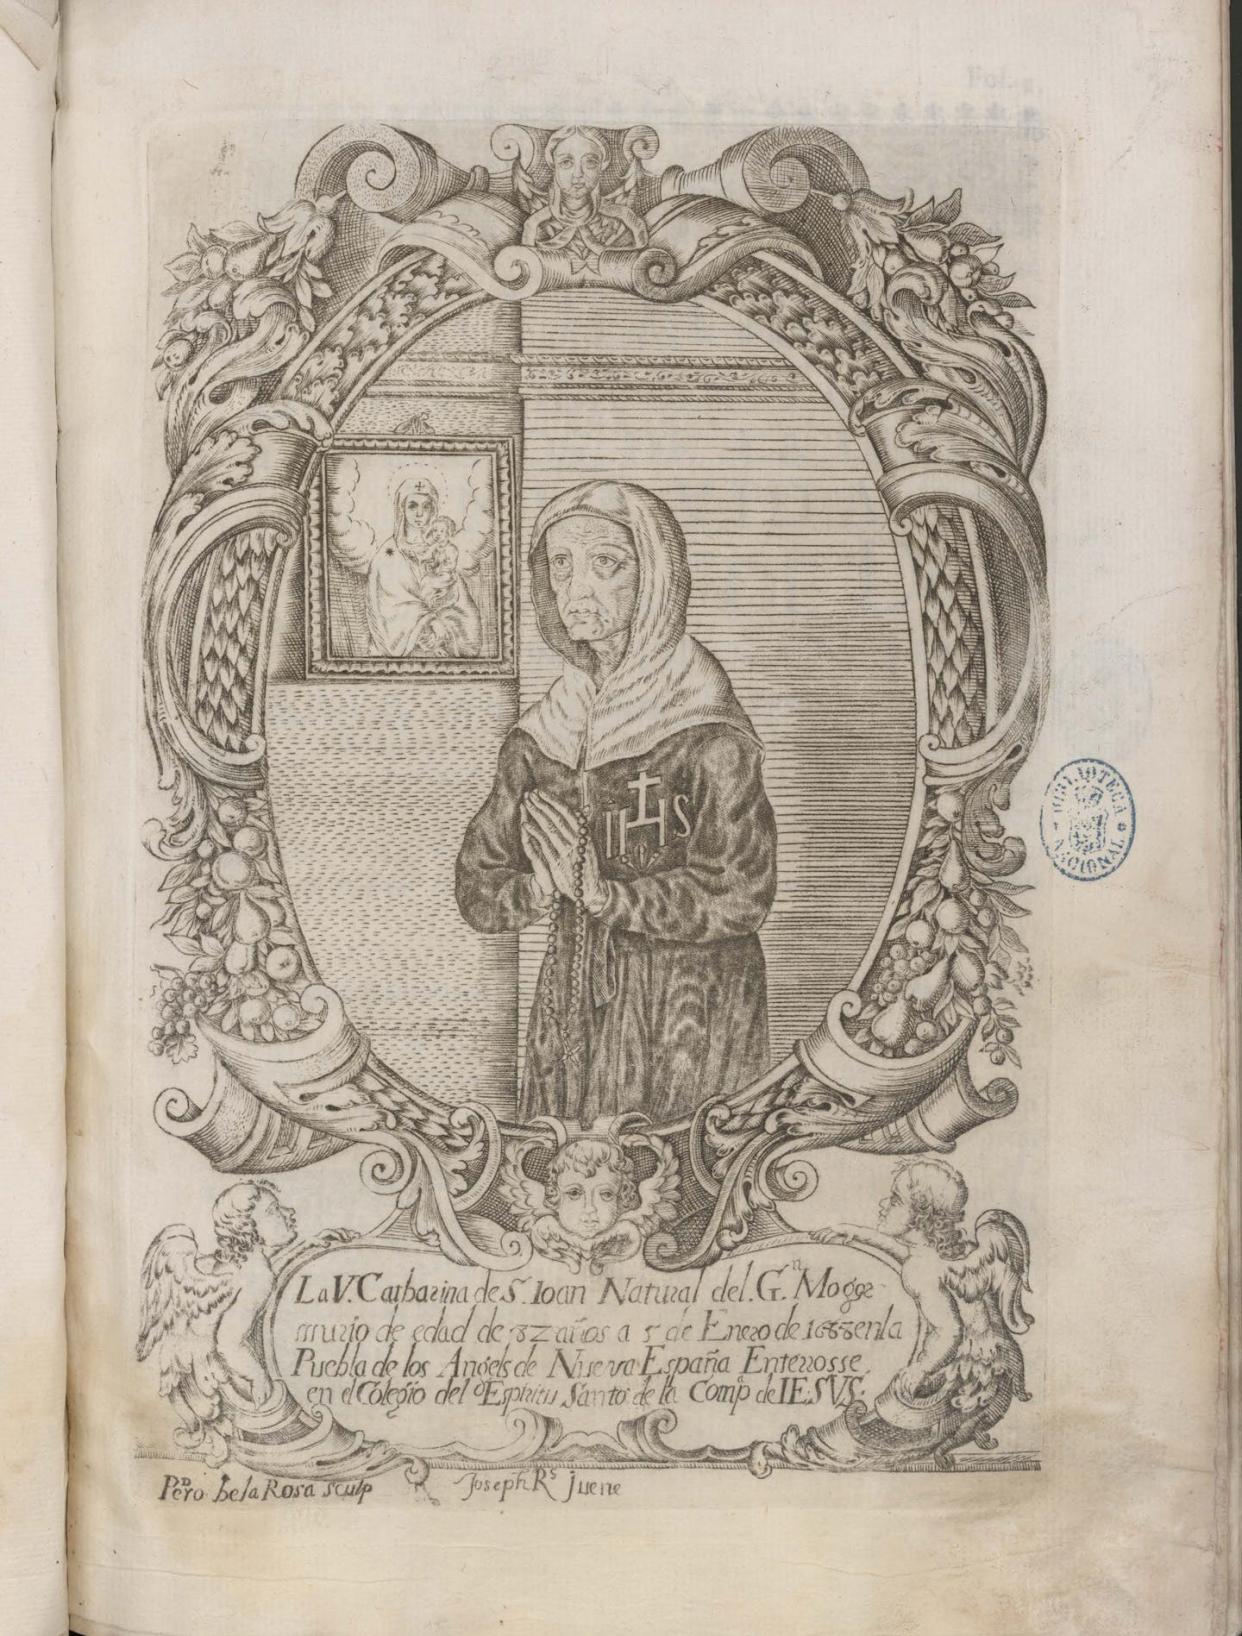 Catarina was revered in Puebla, Mexico – but devotion to her attracted Catholic authorities' disapproval after her death. Image from the collections of the Biblioteca Nacional de España